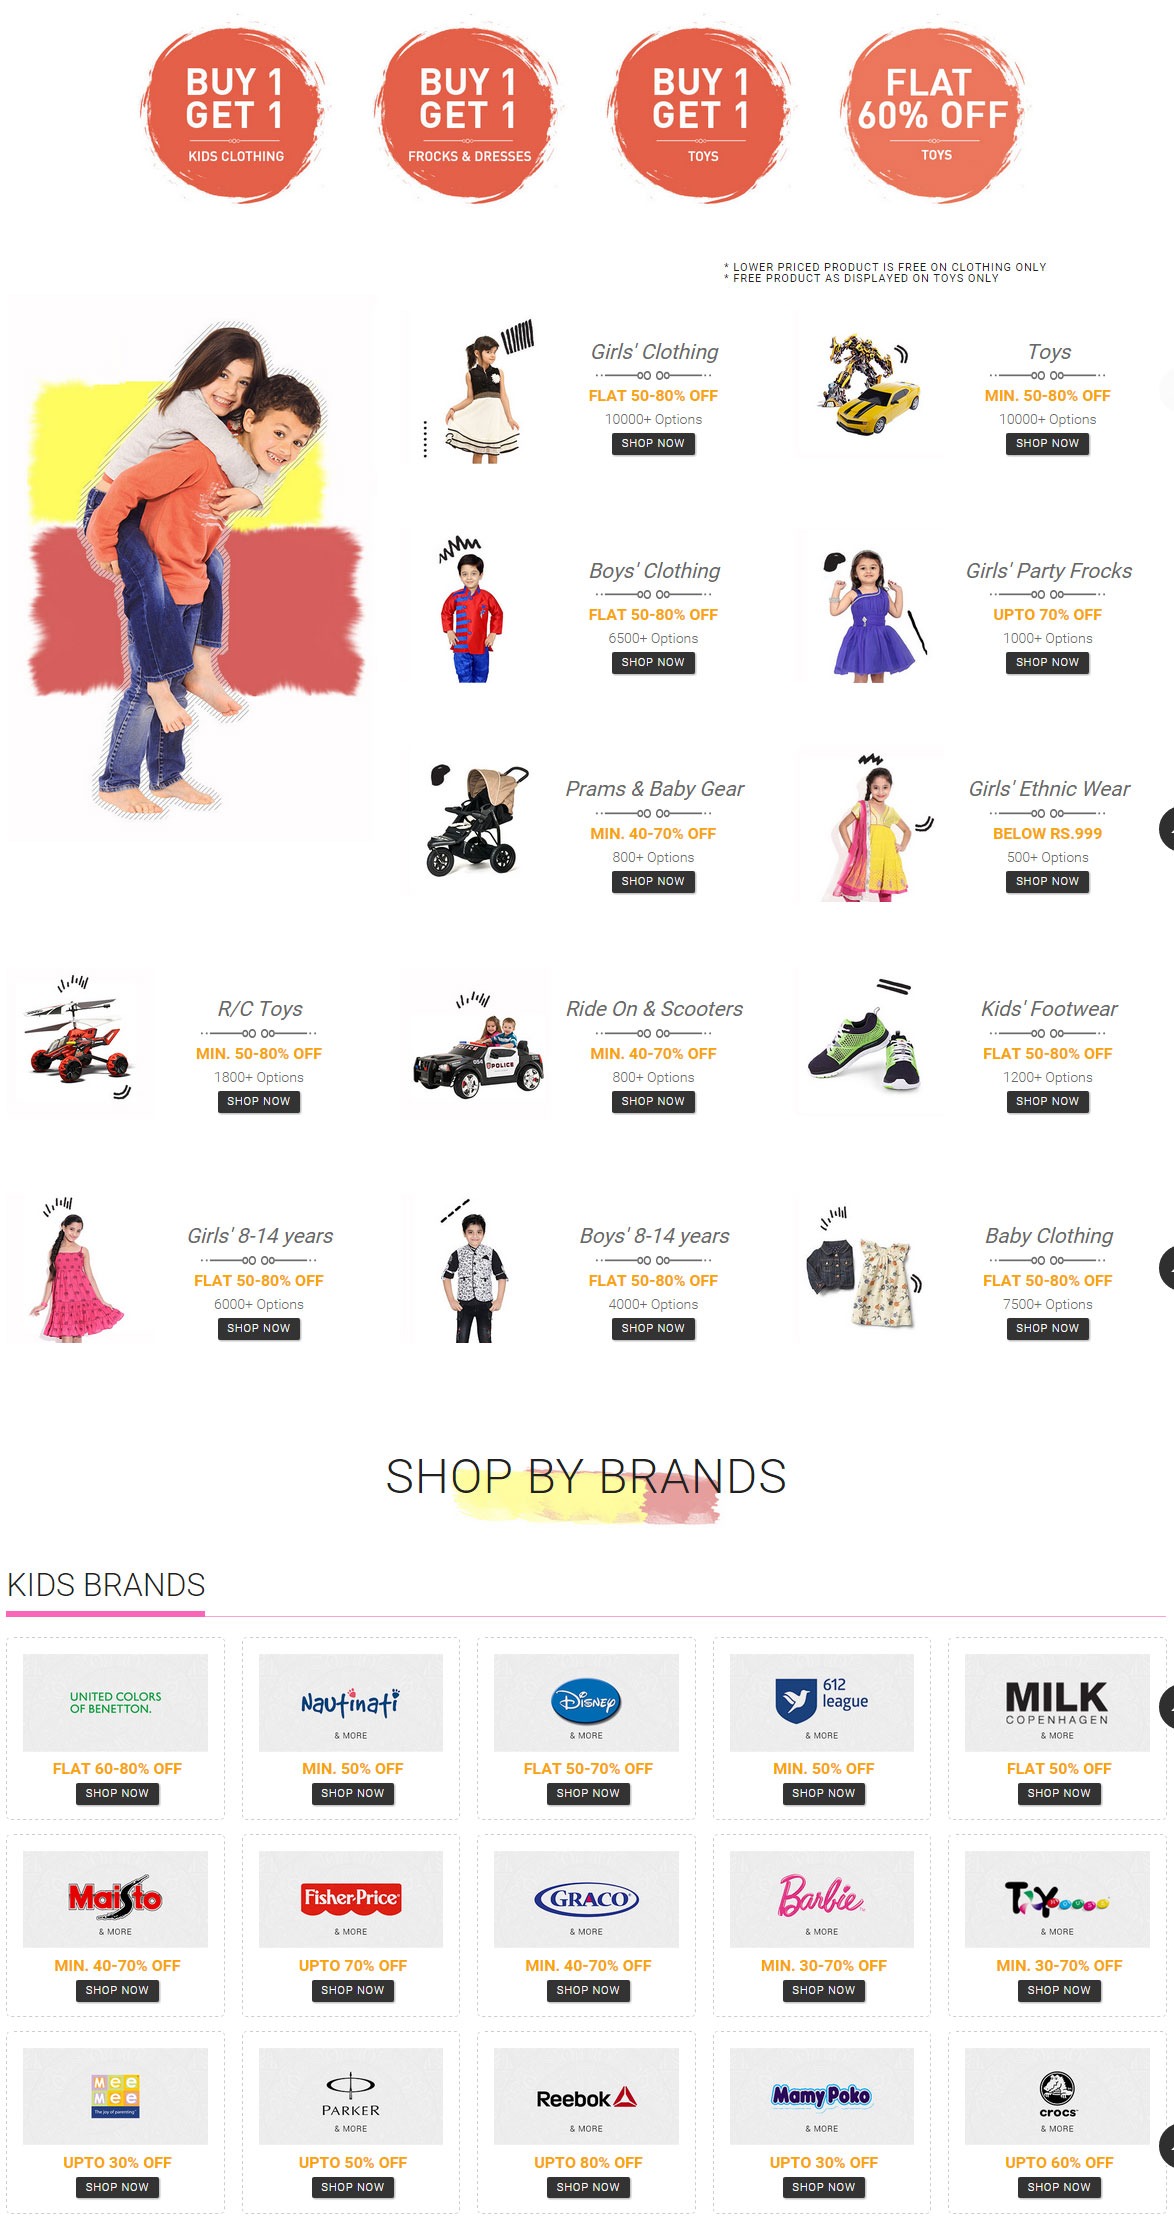 snapdeal-fashion-sale-kids-2015-fashion-monday-october-26-2015